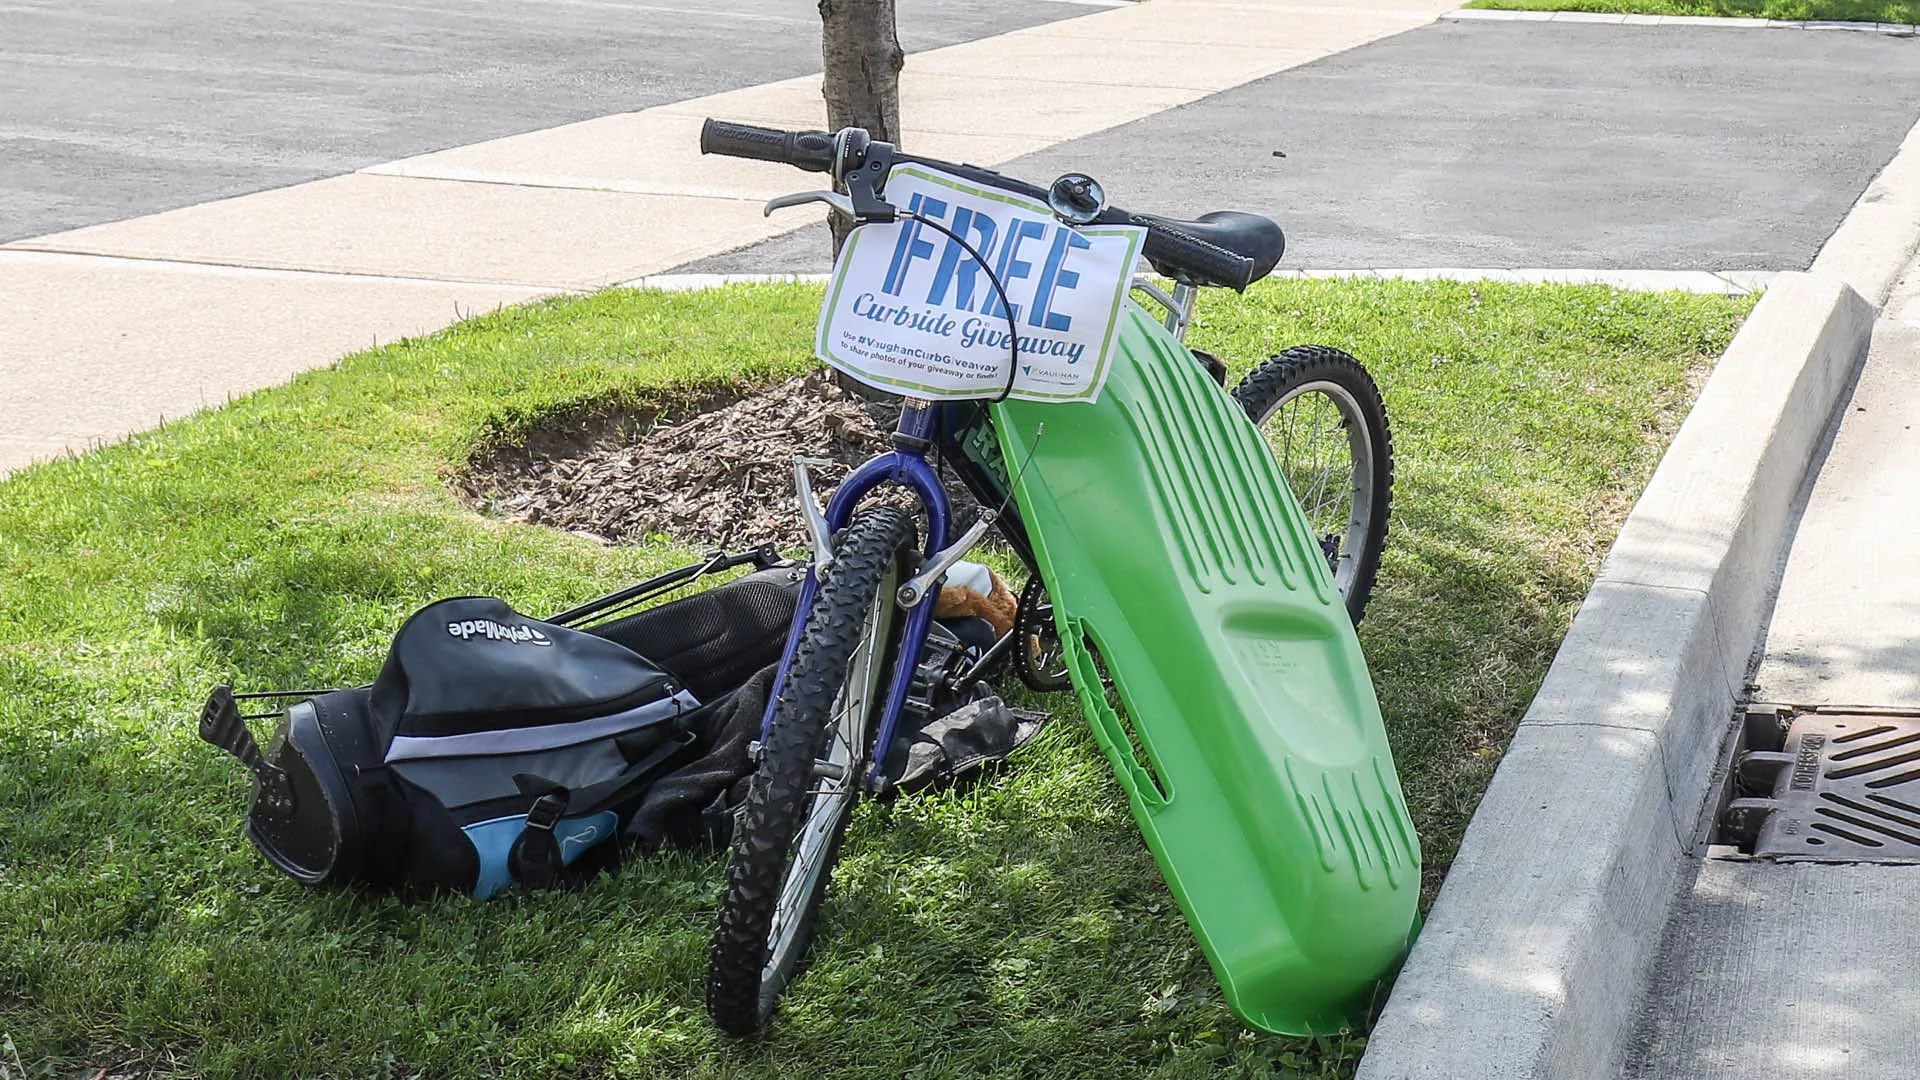 golf club bag, bicycle and green tub at the curb